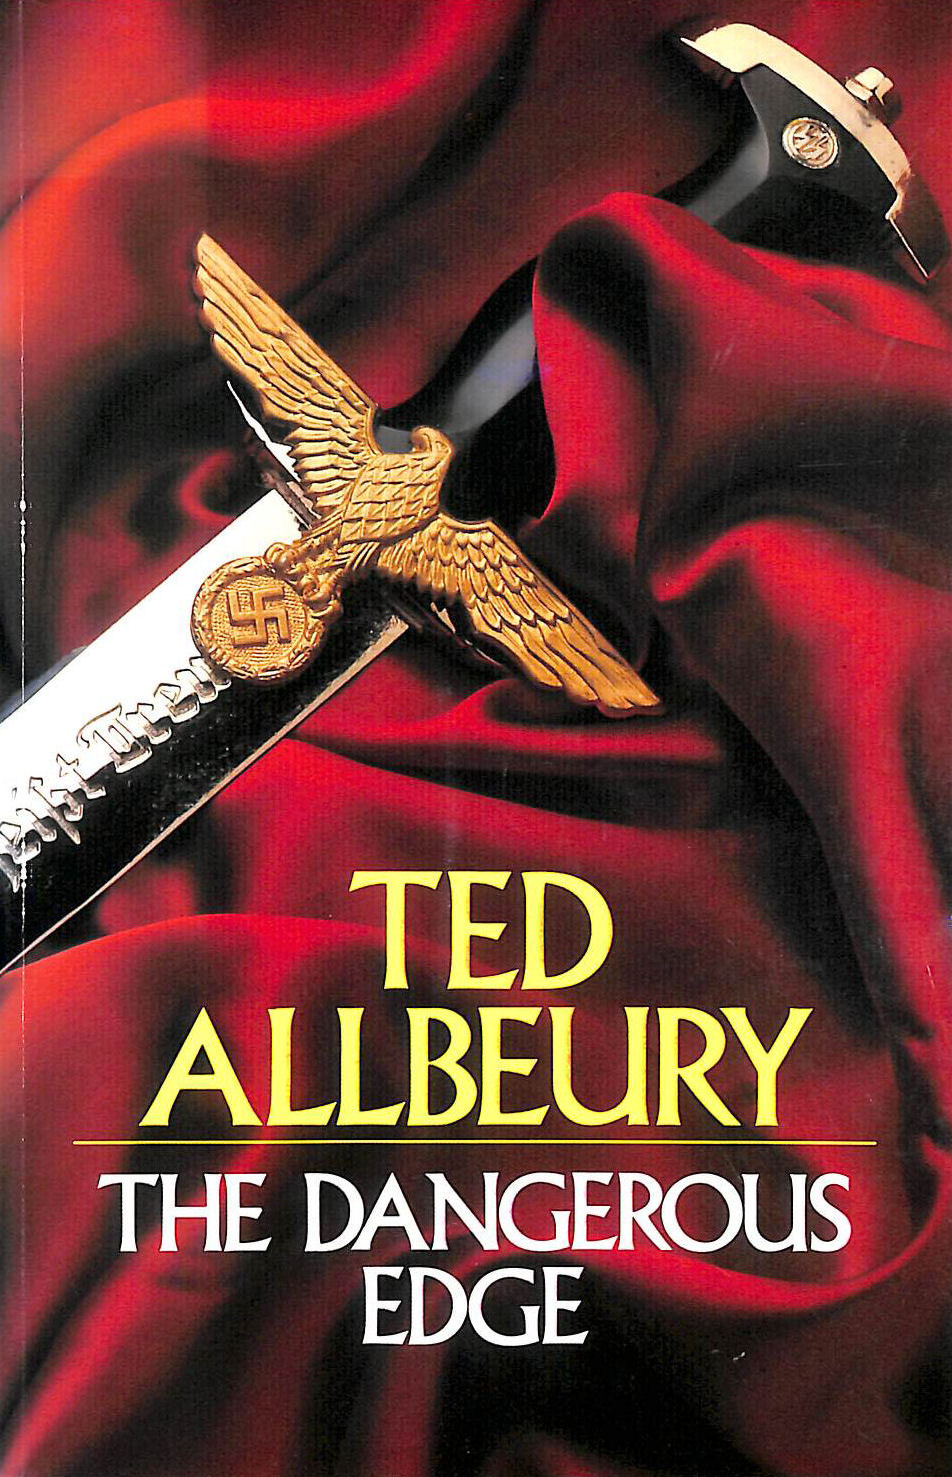 ALLBEURY, TED - Dangerous Edge (Paragon Softcover Large Print Books)